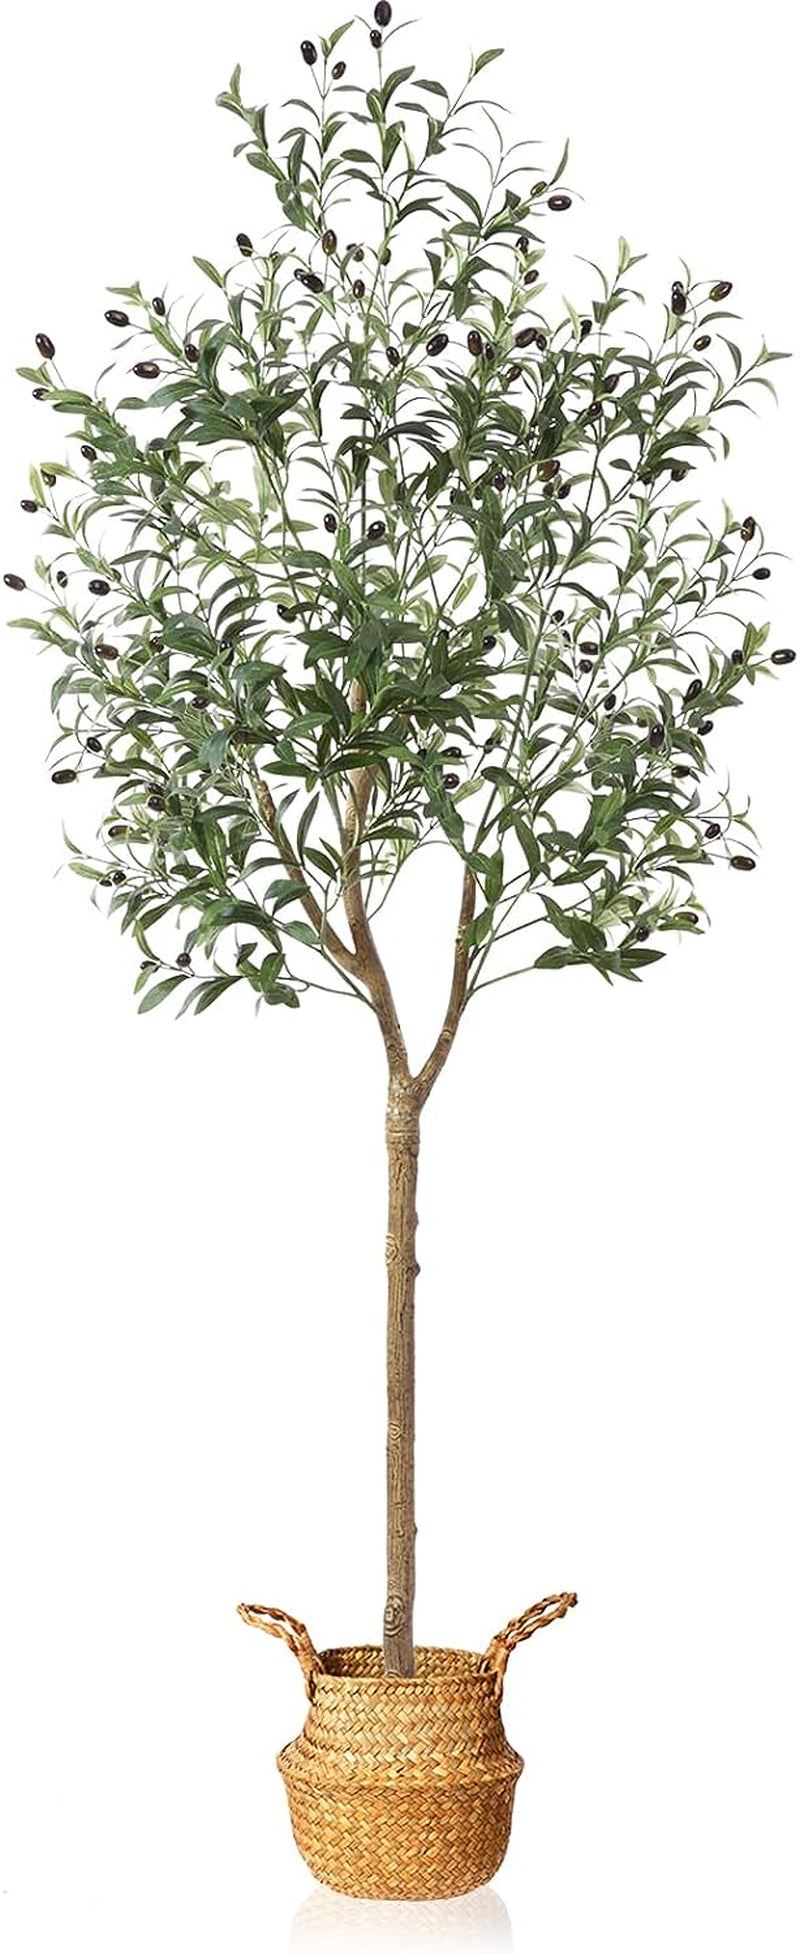 MOSADE Artificial Olive Tree 7 Feet Fake Olive Silk Plant and Handmade Seagrass Basket, Perfect Tall Faux Topiary Silk Tree for Indoor Entryway Modern Decor Home Office Porch Balcony Gift,2Pack  MOSADE 1 6 Feet 